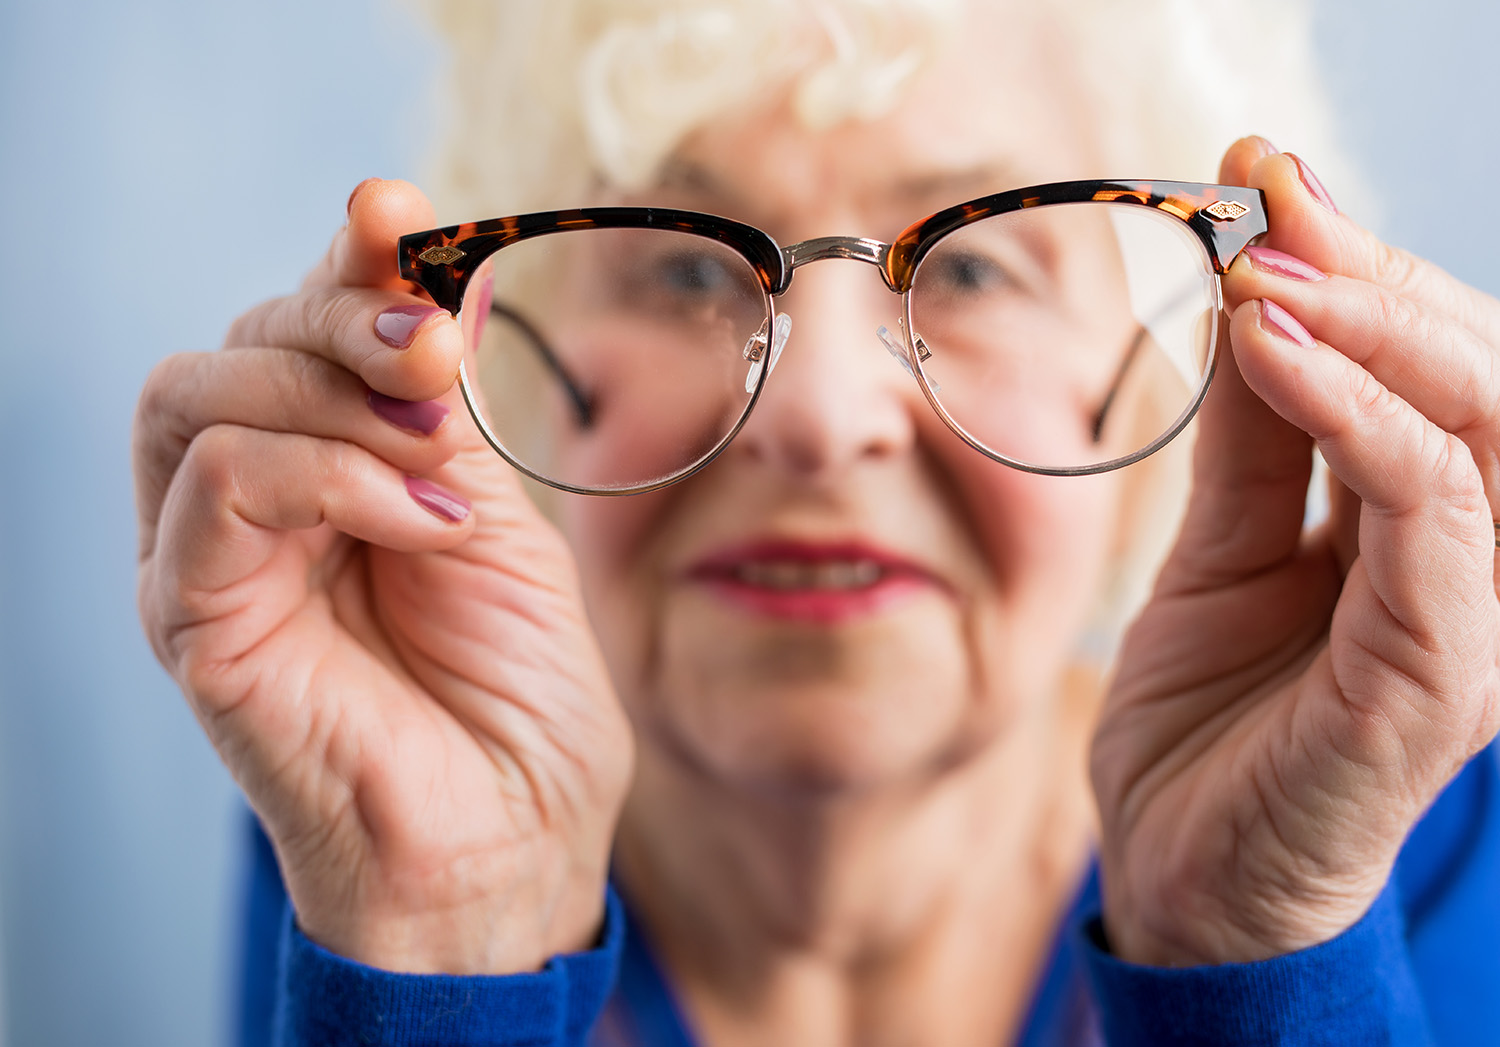 Tips for Finding a Reliable Eye Care Provider